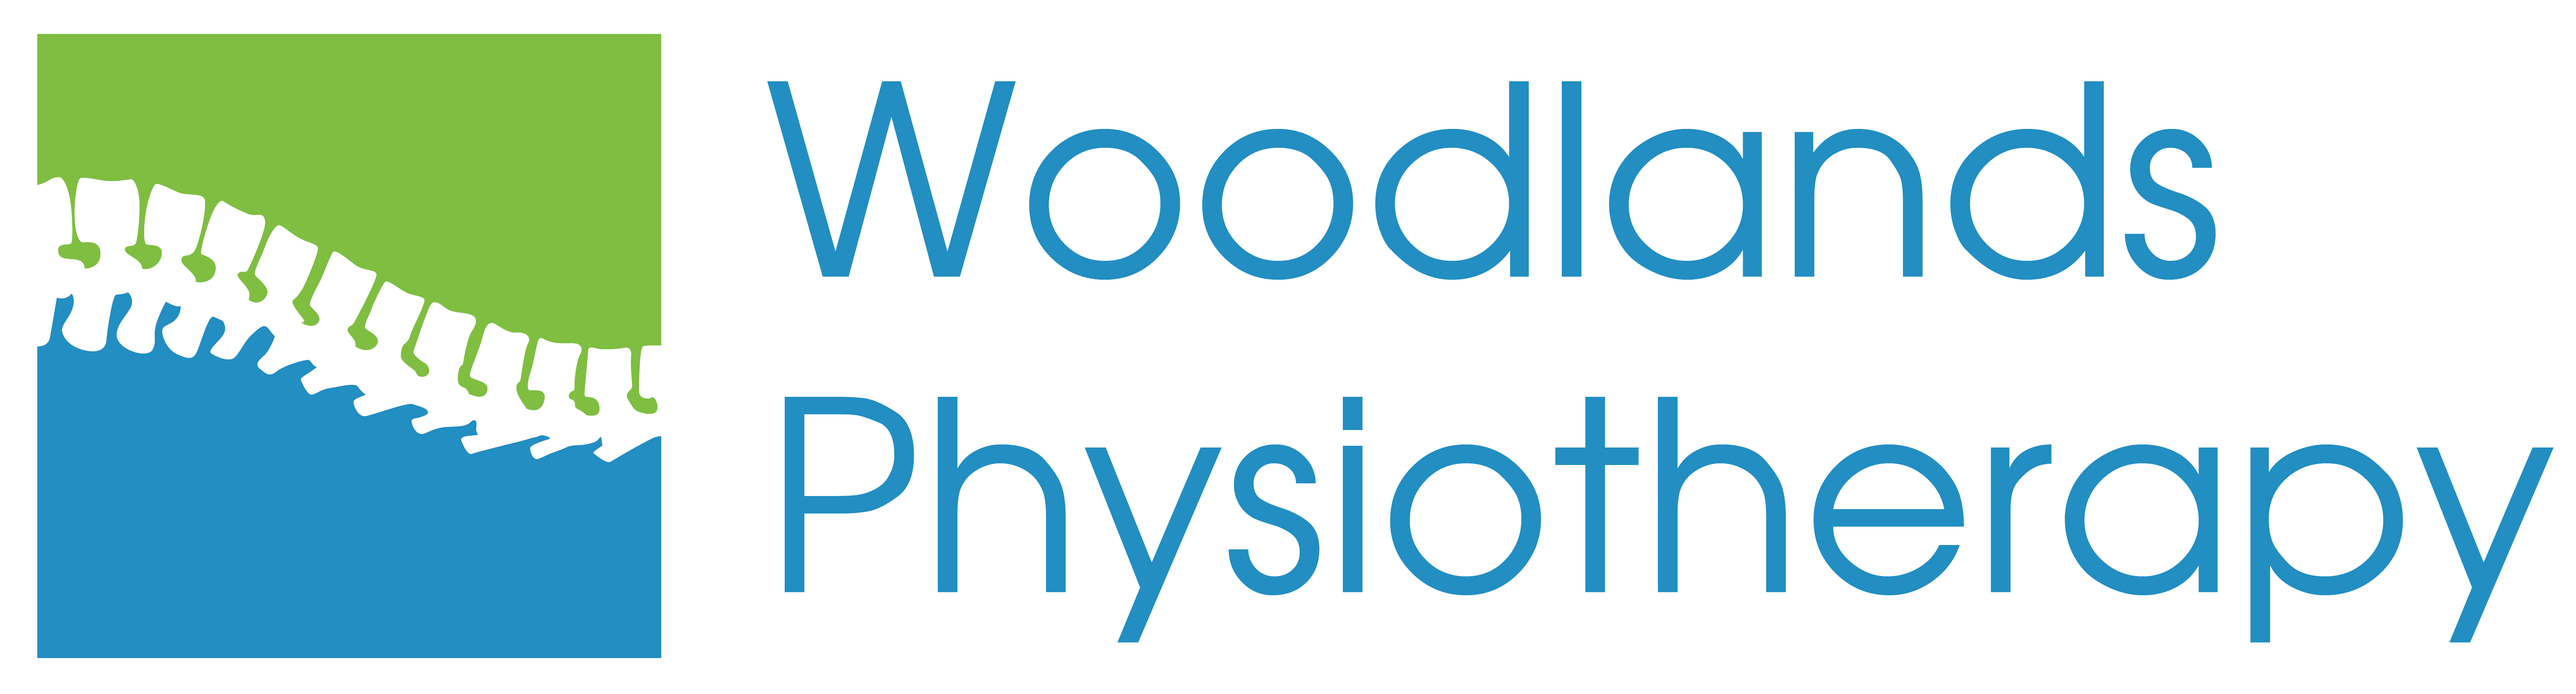 Woodlands Physiotherapy